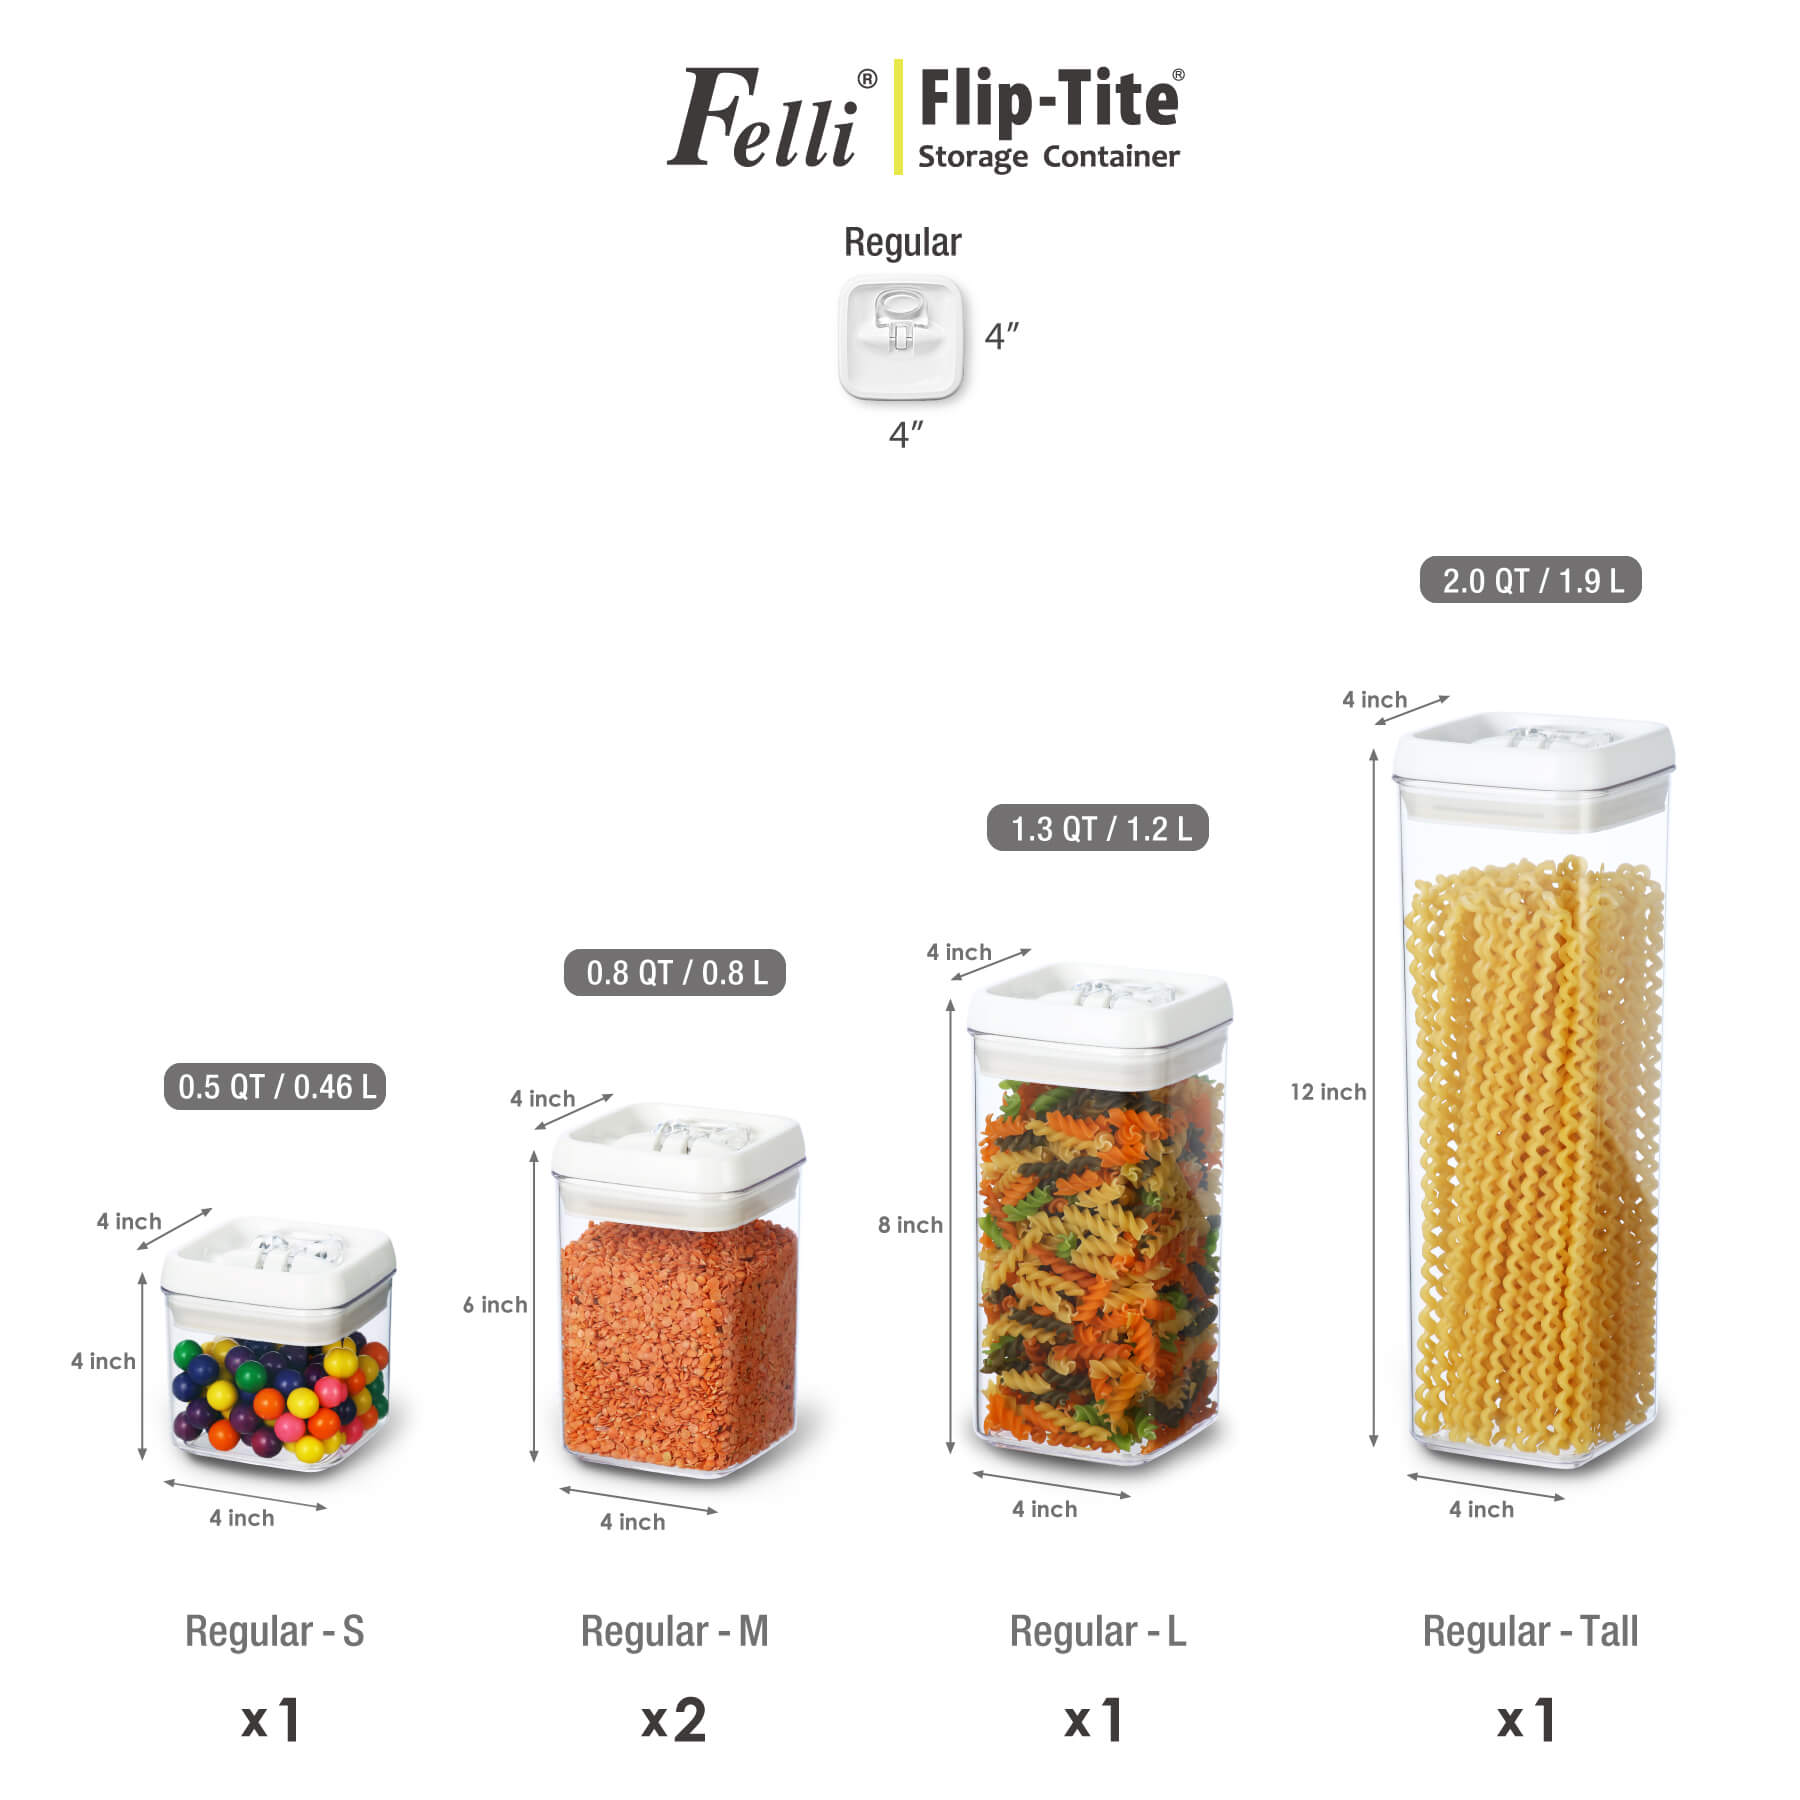 Felli Official | Flip TITE Storage Container 5pk Variety Gift Set